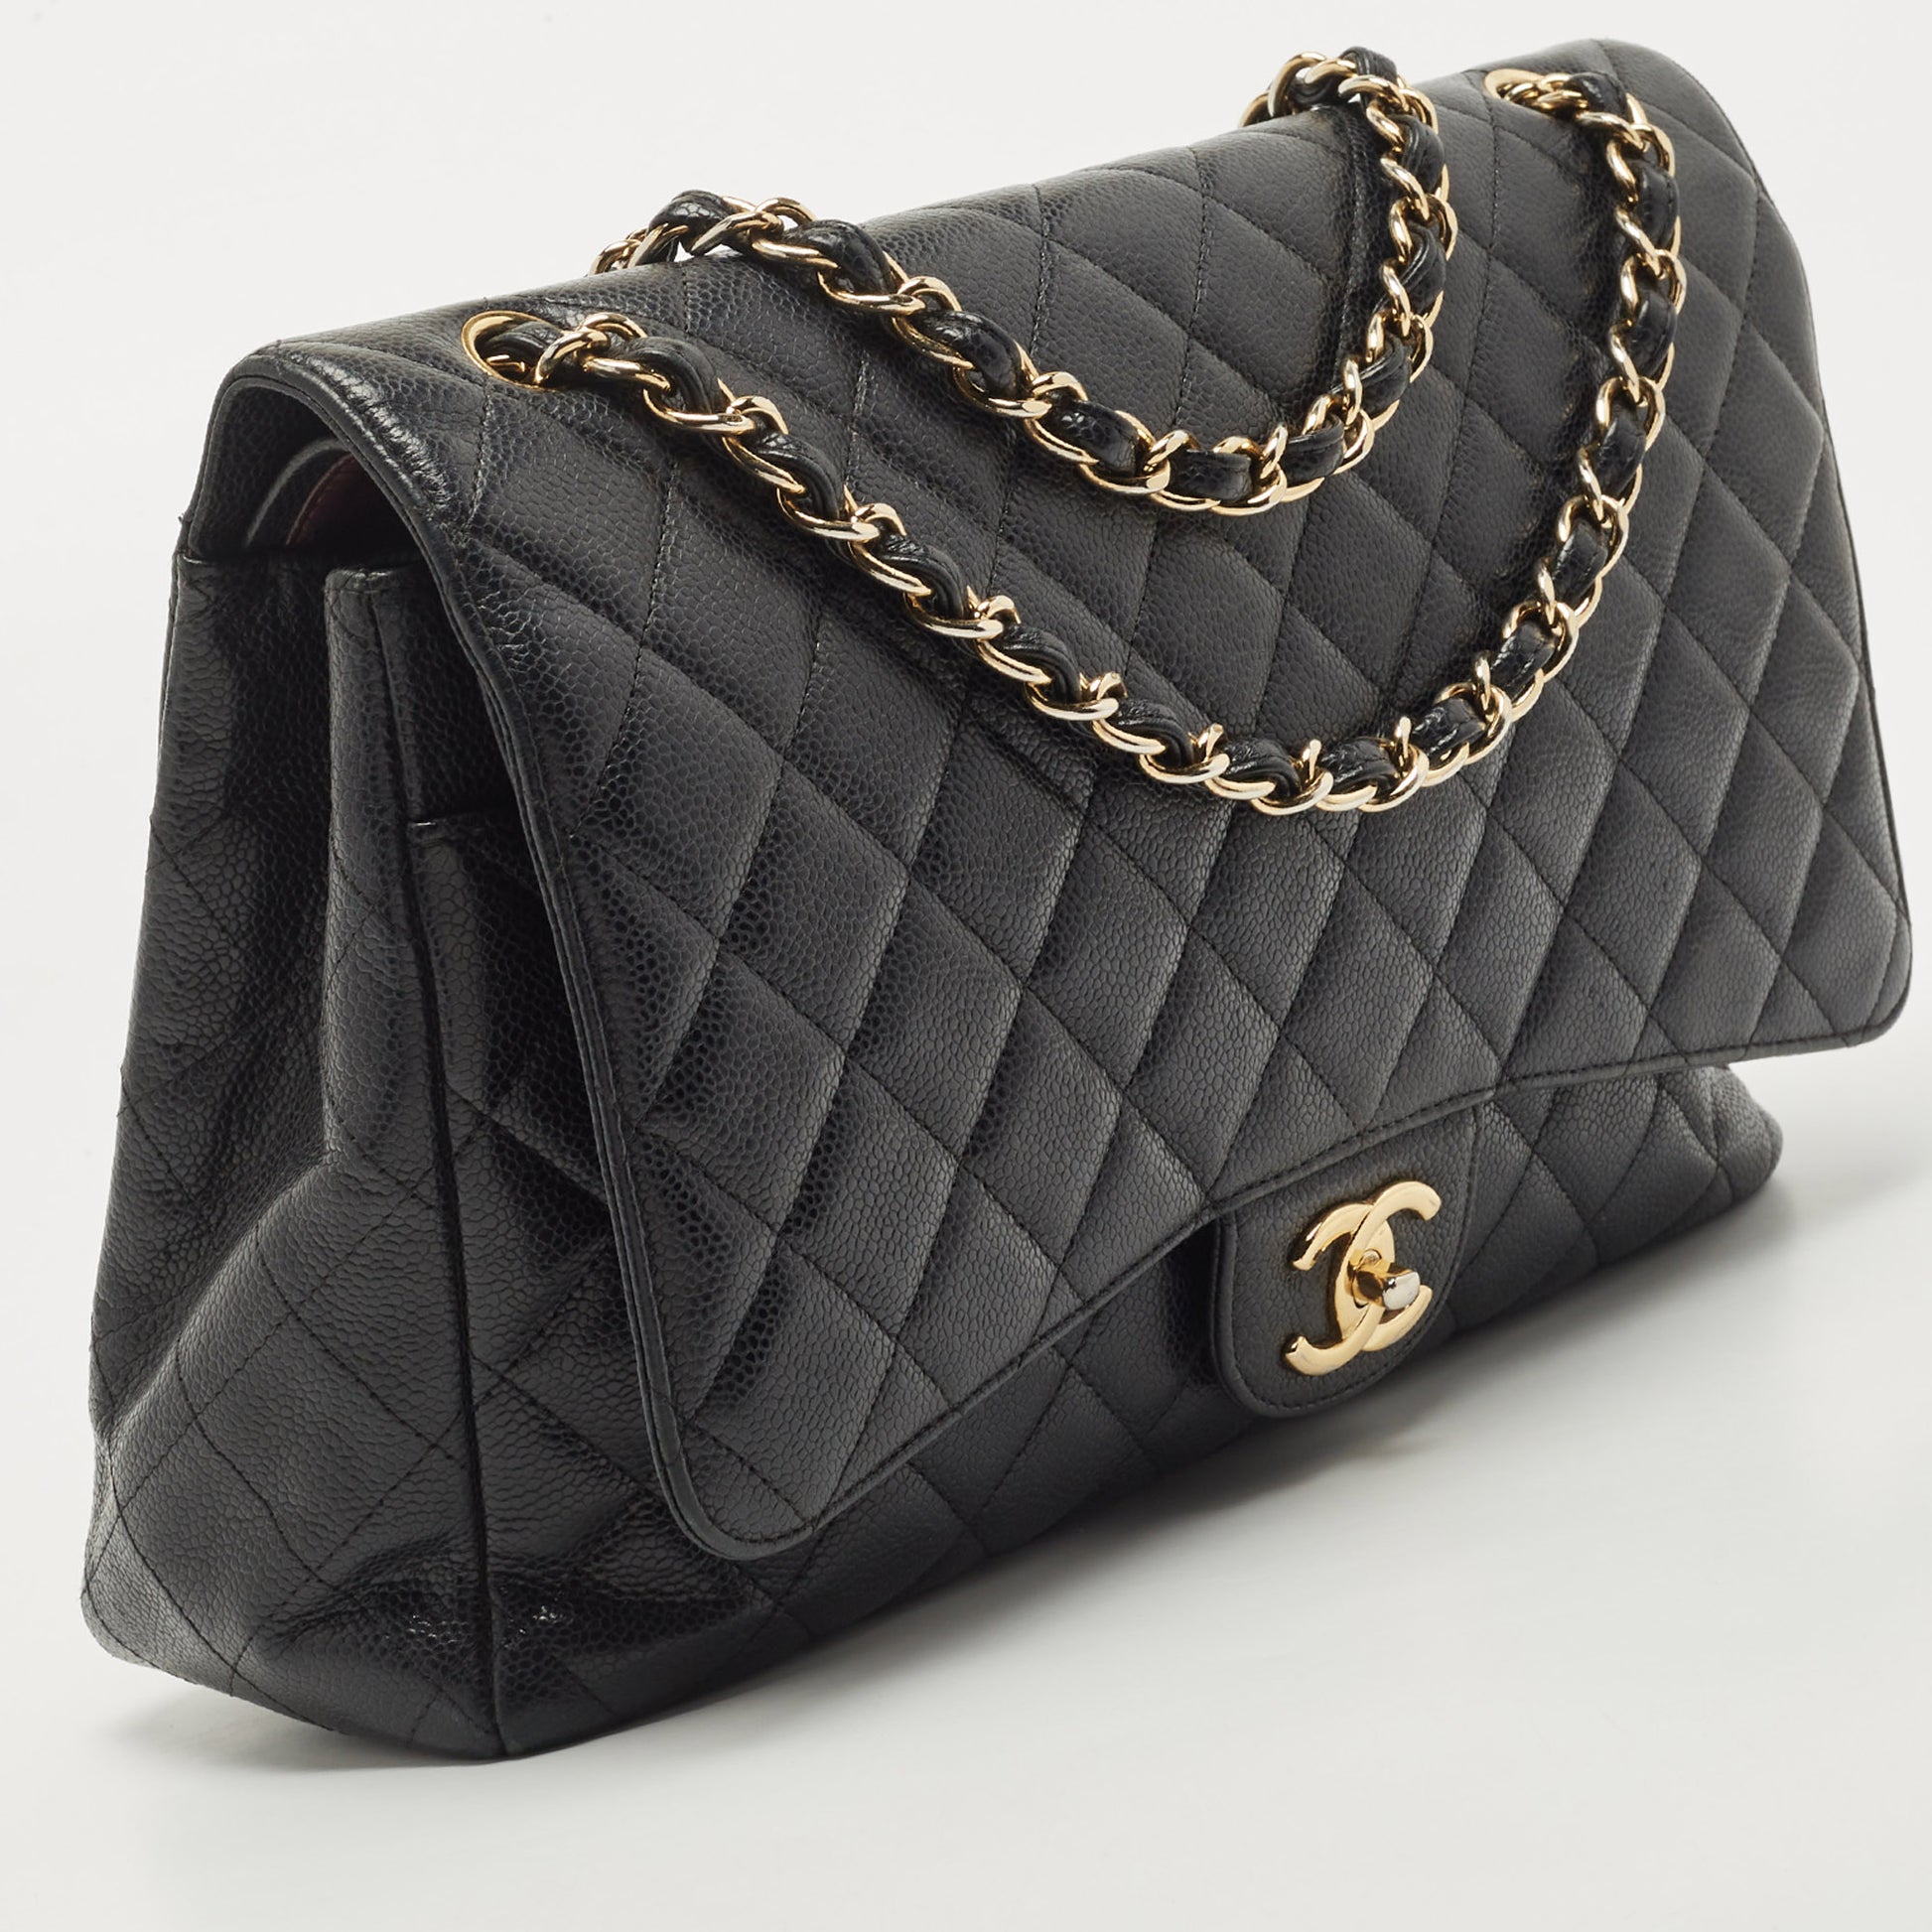 Chanel Bronze Leather Maxi Classic Flap Bag